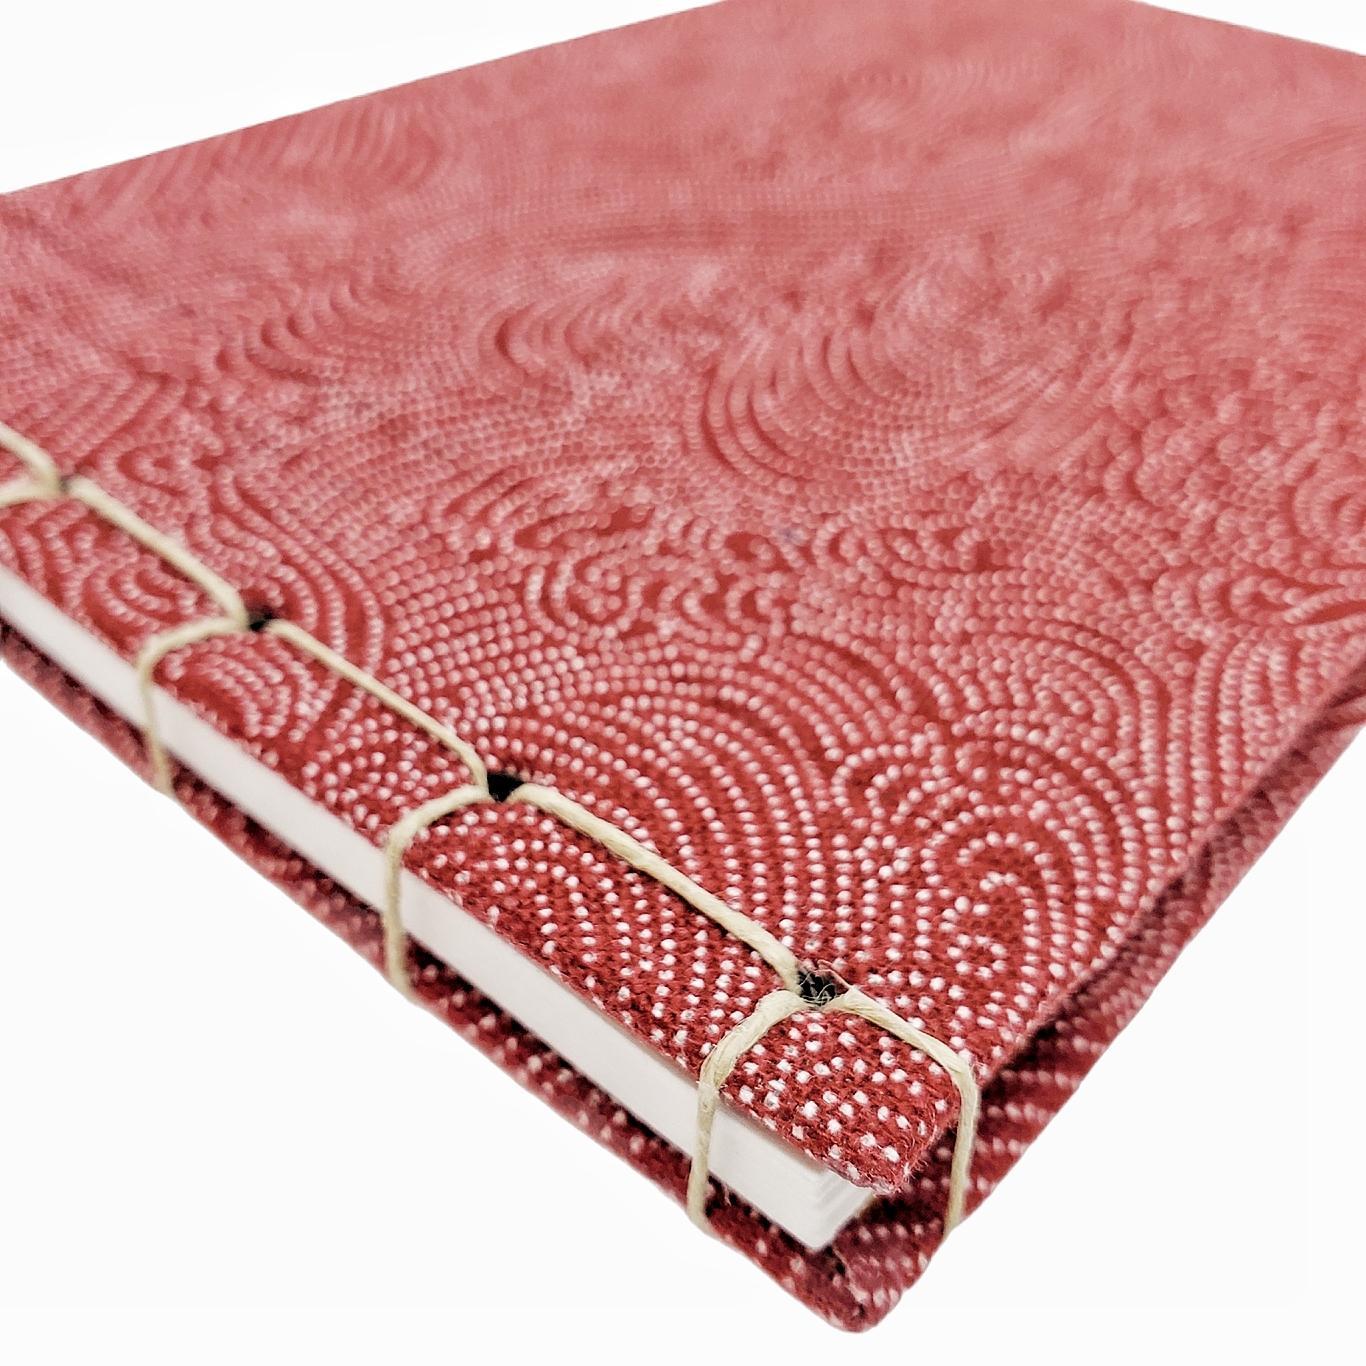 Journal - Seigaiha Waves Red Fabric Hand-bound Hardcover by Studio Artisaan